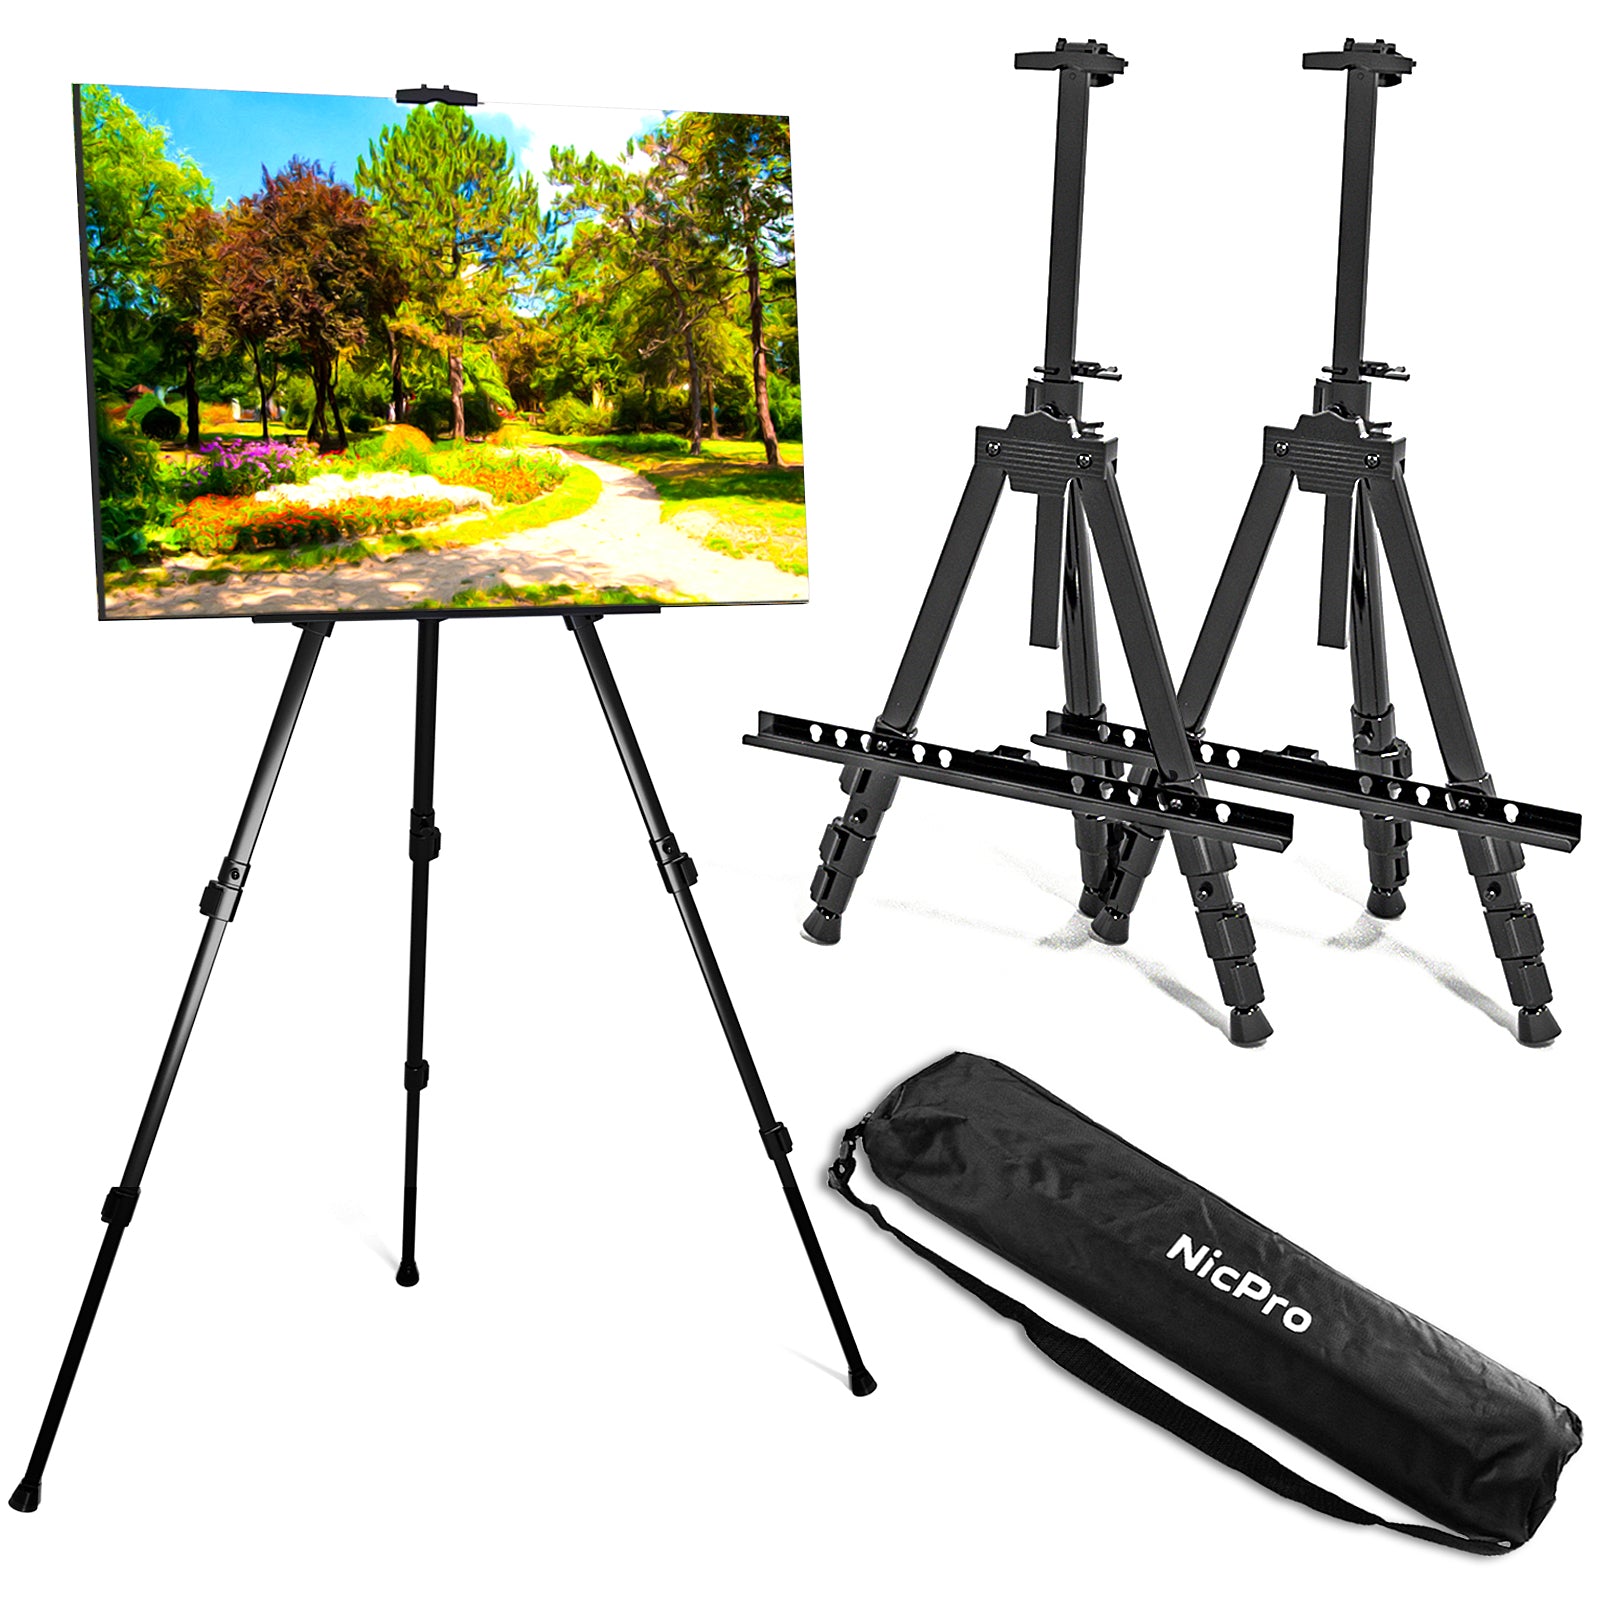 REALWAY 63 Folding Easel Stand for Display,Adjustable Floor Poster Easel  for Arts,Pictures,Paintings,Telescoping Black Metal Easel Fit for Signs at